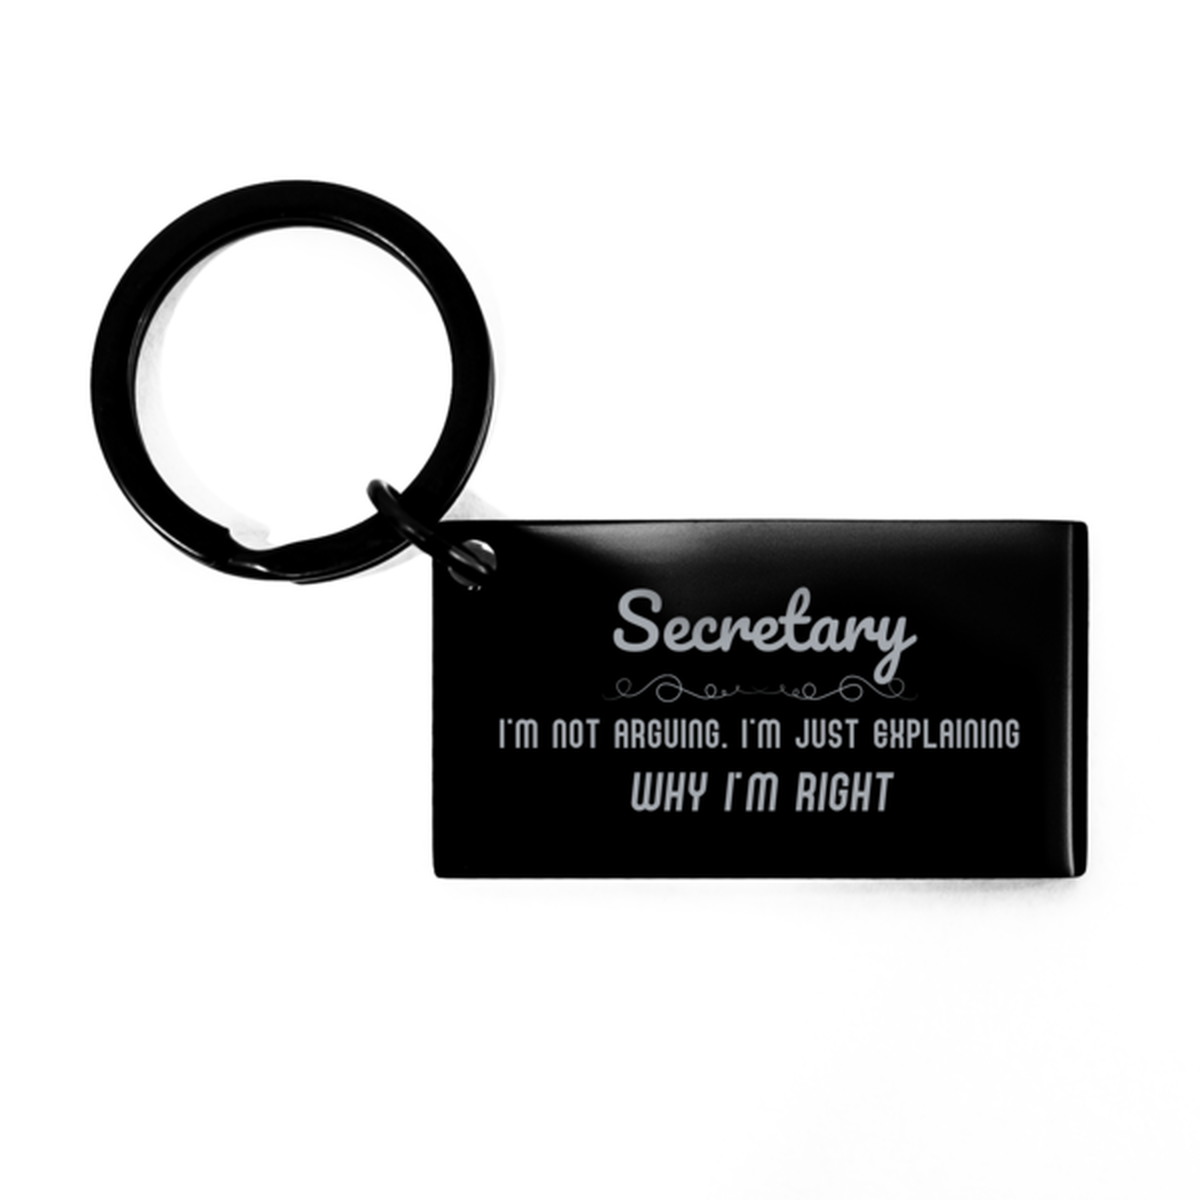 Secretary I'm not Arguing. I'm Just Explaining Why I'm RIGHT Keychain, Funny Saying Quote Secretary Gifts For Secretary Graduation Birthday Christmas Gifts for Men Women Coworker